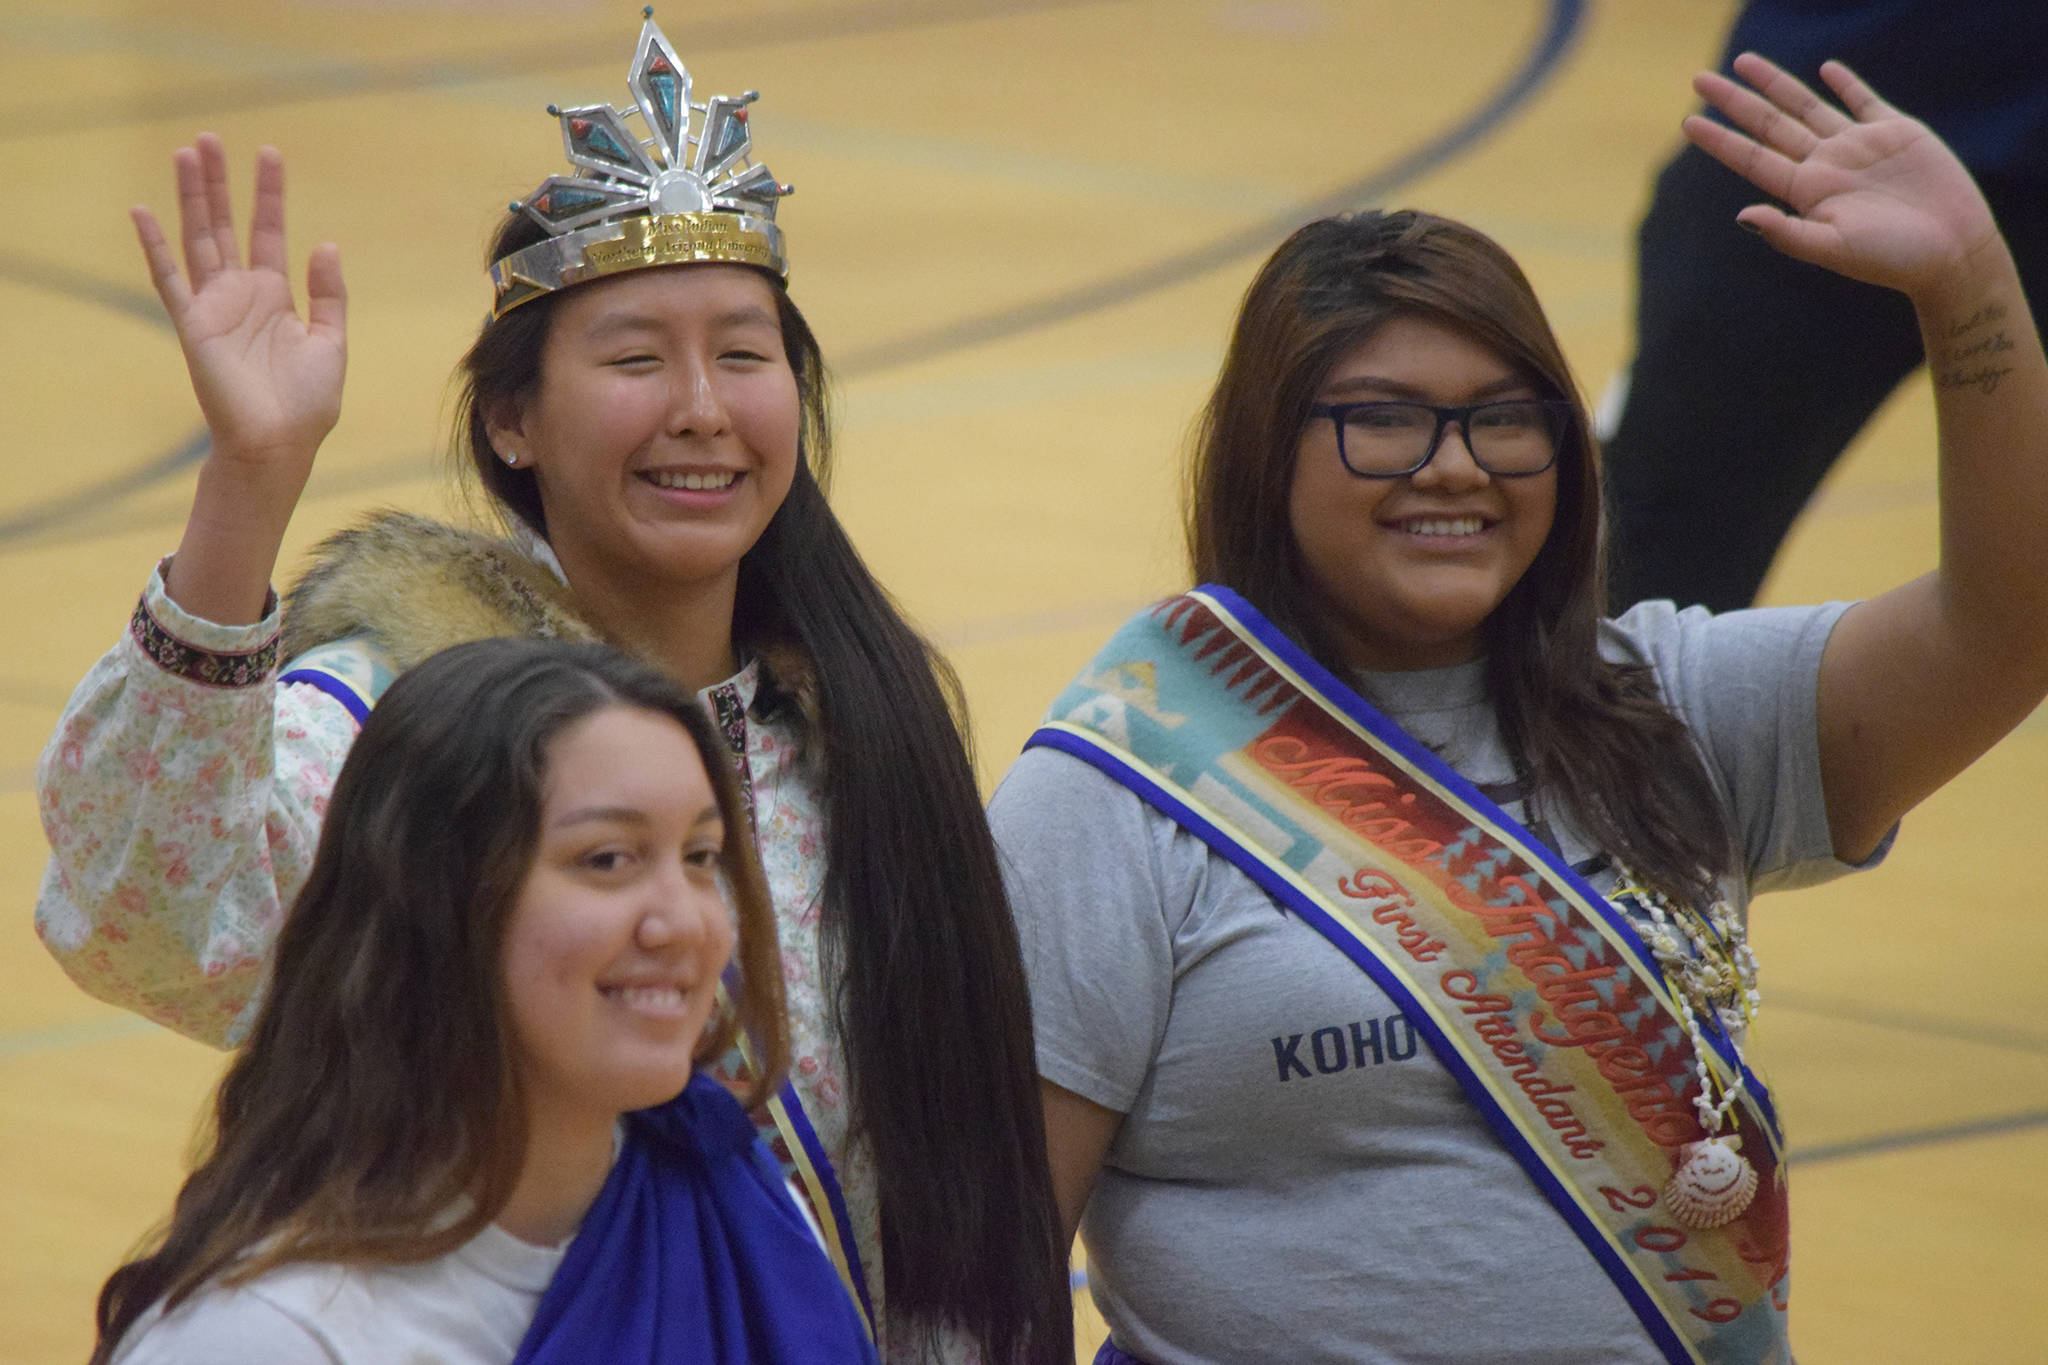 Northern Arizona University’s Miss Indigenous Shondiin Mayo, center, greets the crowd at the 2019 Traditional Games at Thunder Mountain High School on Saturday, March 16, 2019. Mayo and several others from NAU are participating in the two-day event featuring the traditional games of the Alaska Native peoples. (Nolin Ainsworth | Juneau Empire)